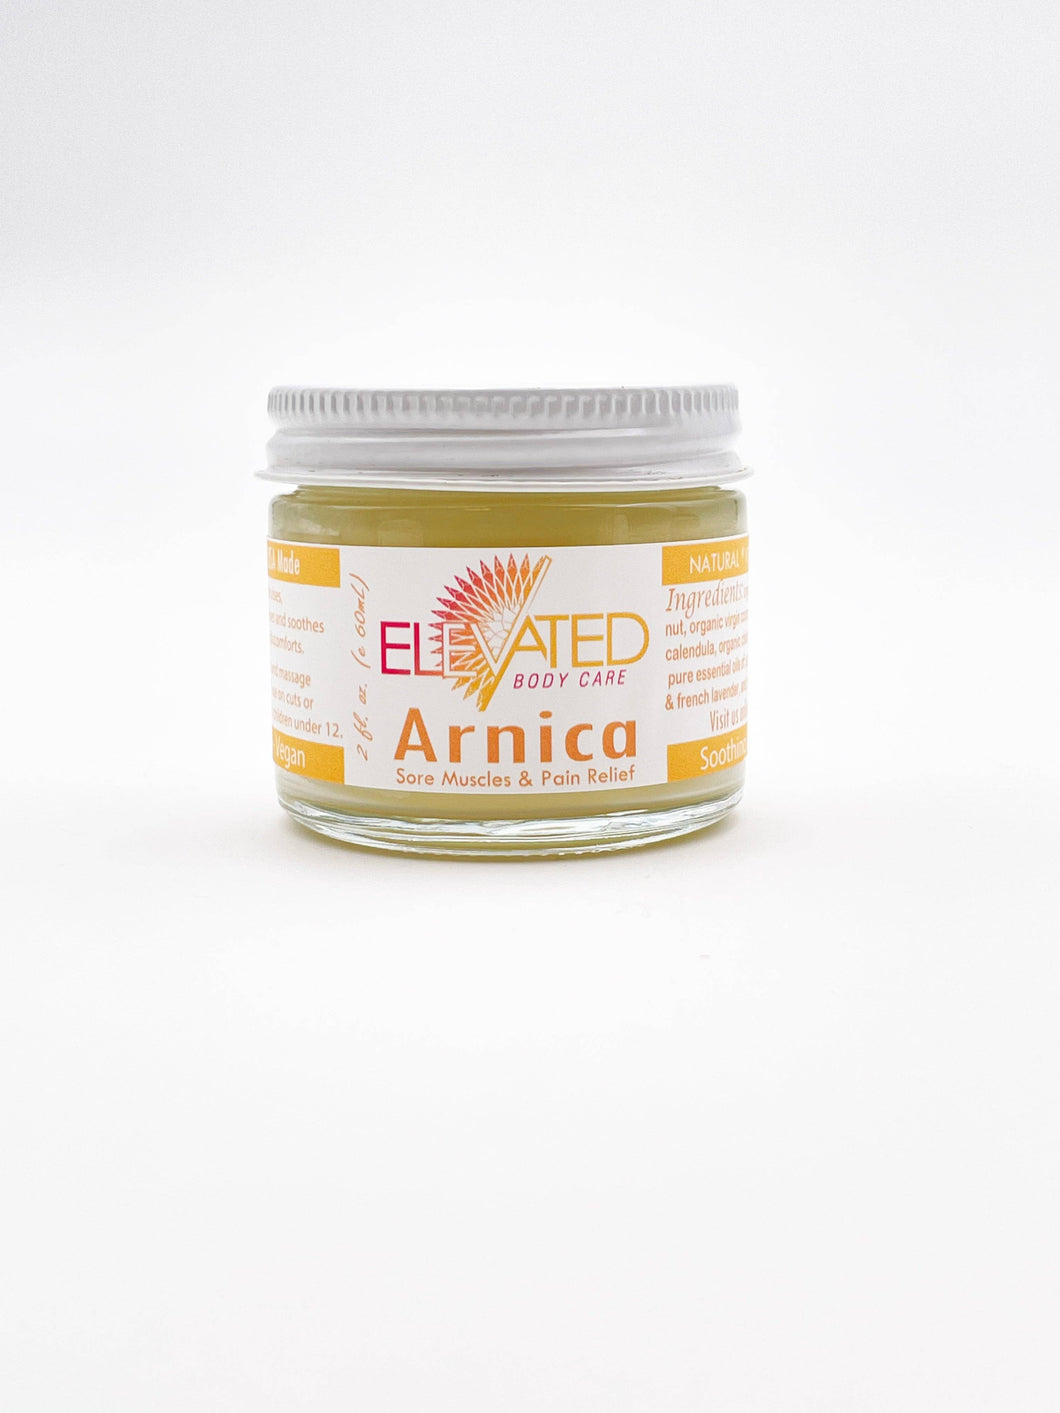 Arnica Natural sore muscle relief, reduce bruising & swelling